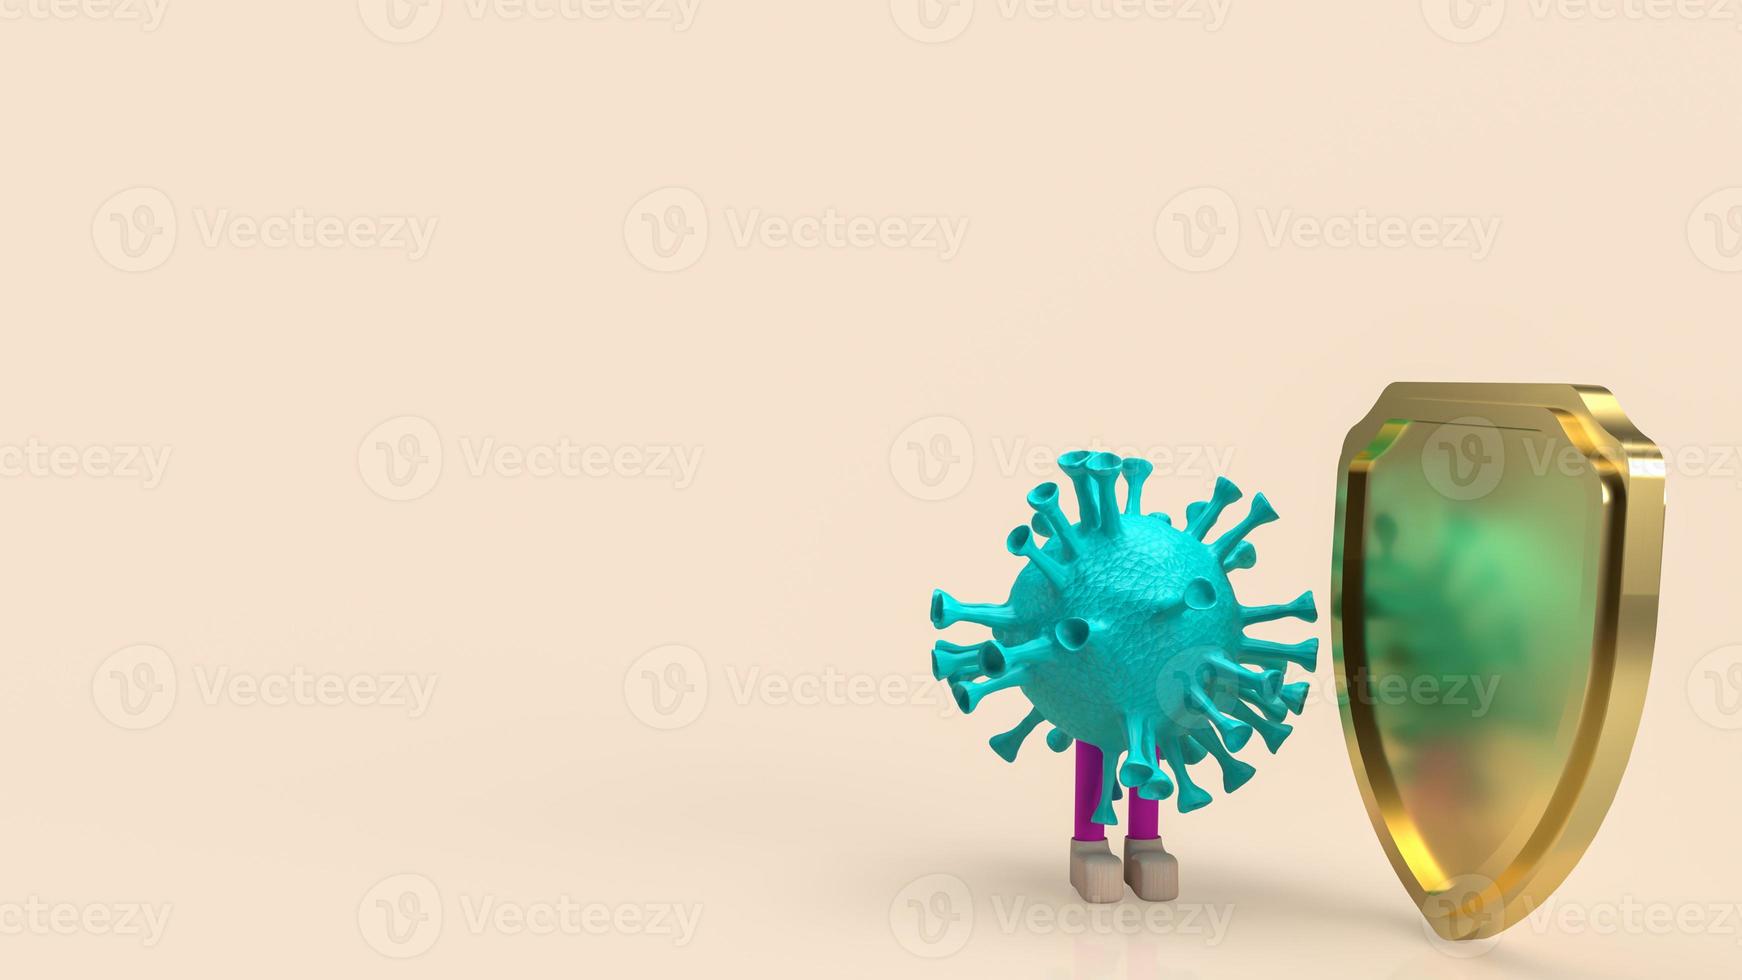 The virus and shield  for medical or sci content 3d rendering photo